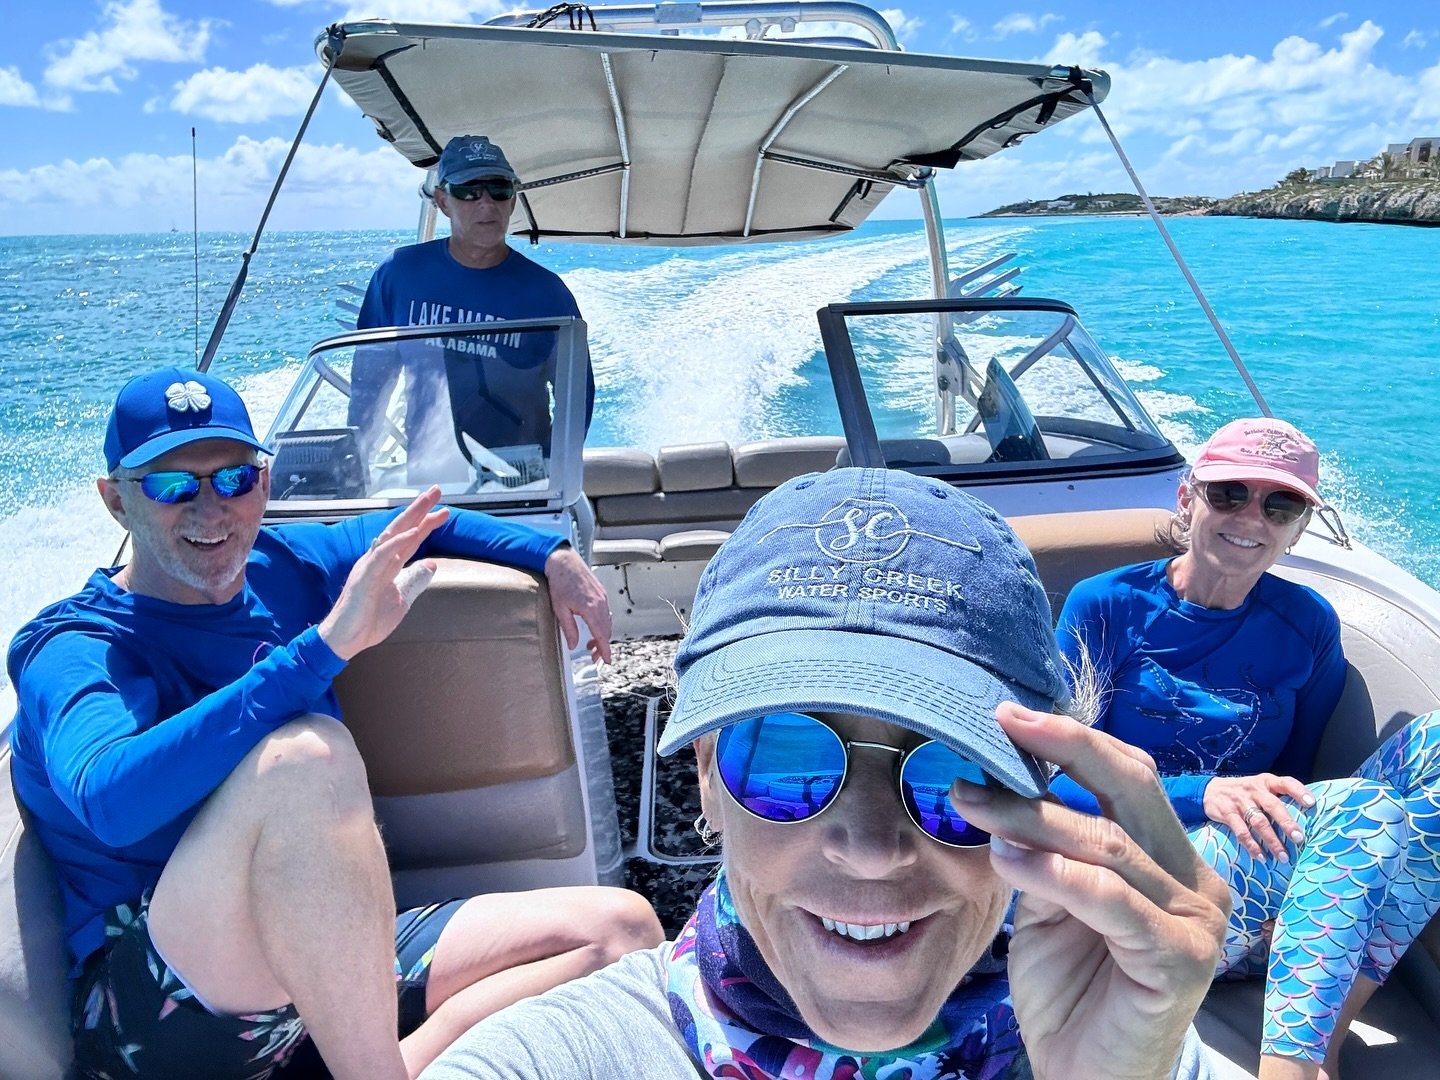 Having the blues in TCI&hellip; is always a GOOD thing! 💙🐬🧢🌊

#sillycreekwatersports #turksandcaicos #boatdaze #islandliving #caribbean #providenciales